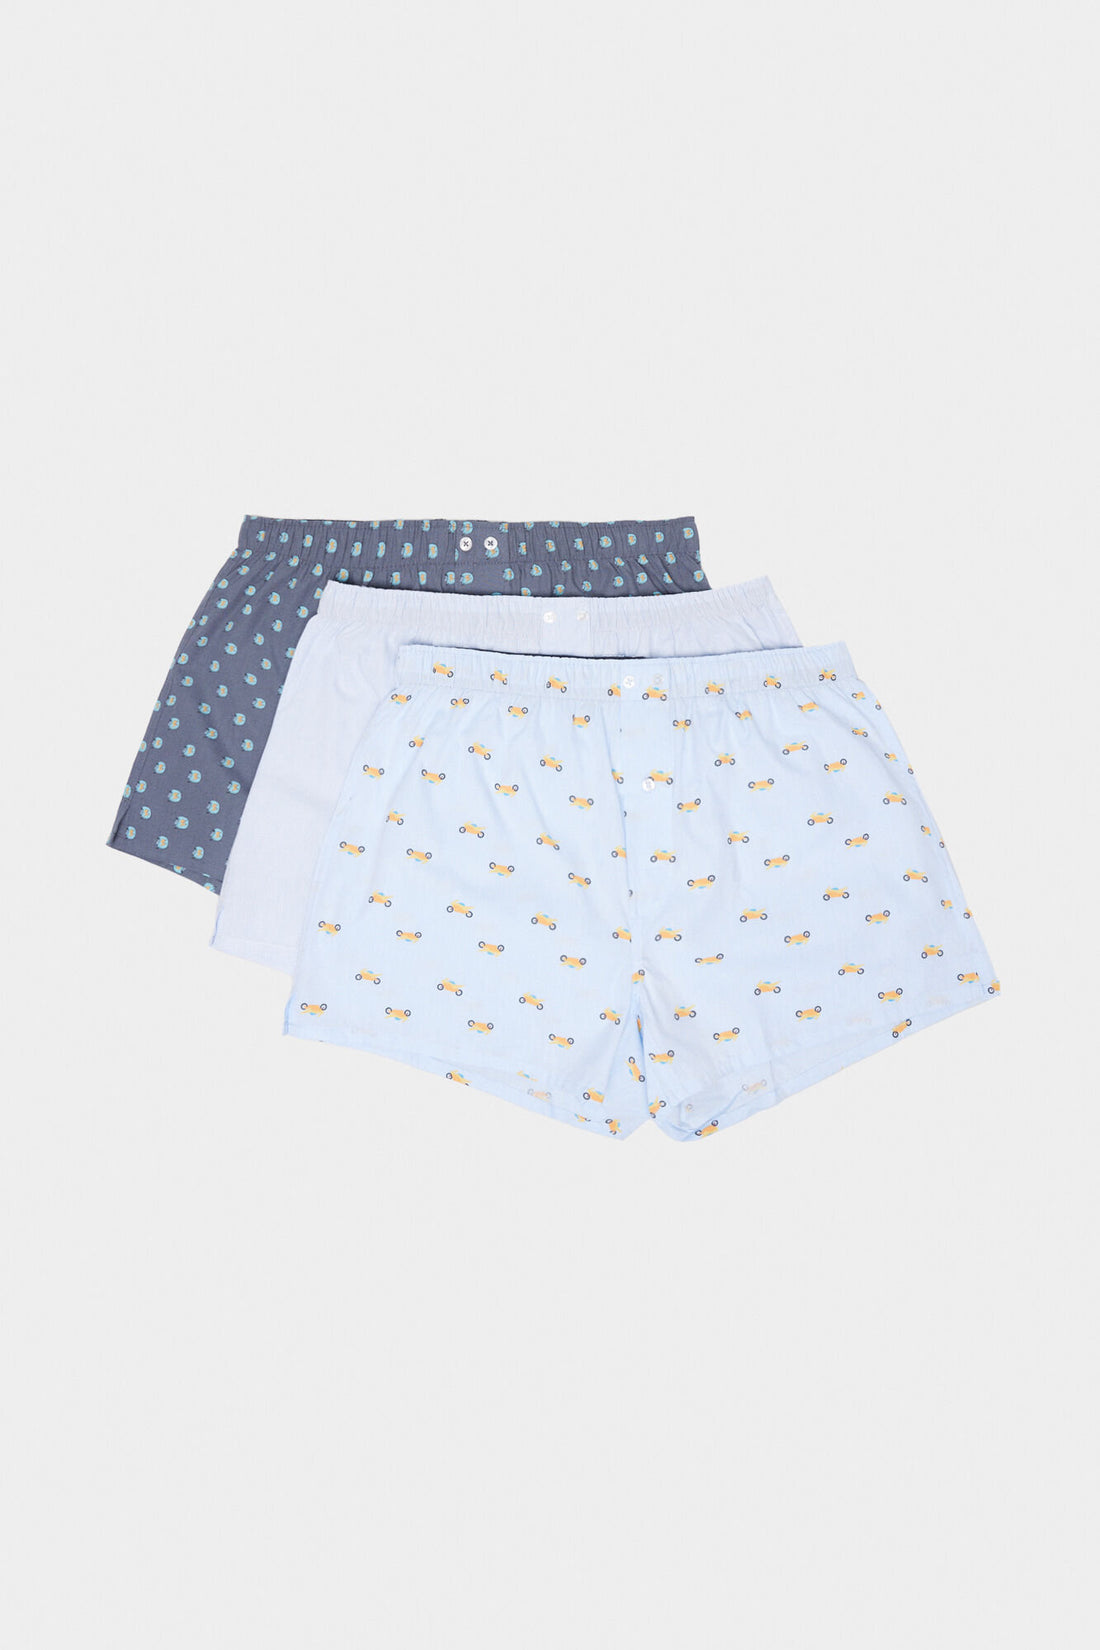 Pack Patterned Boxers_1167484_17_01